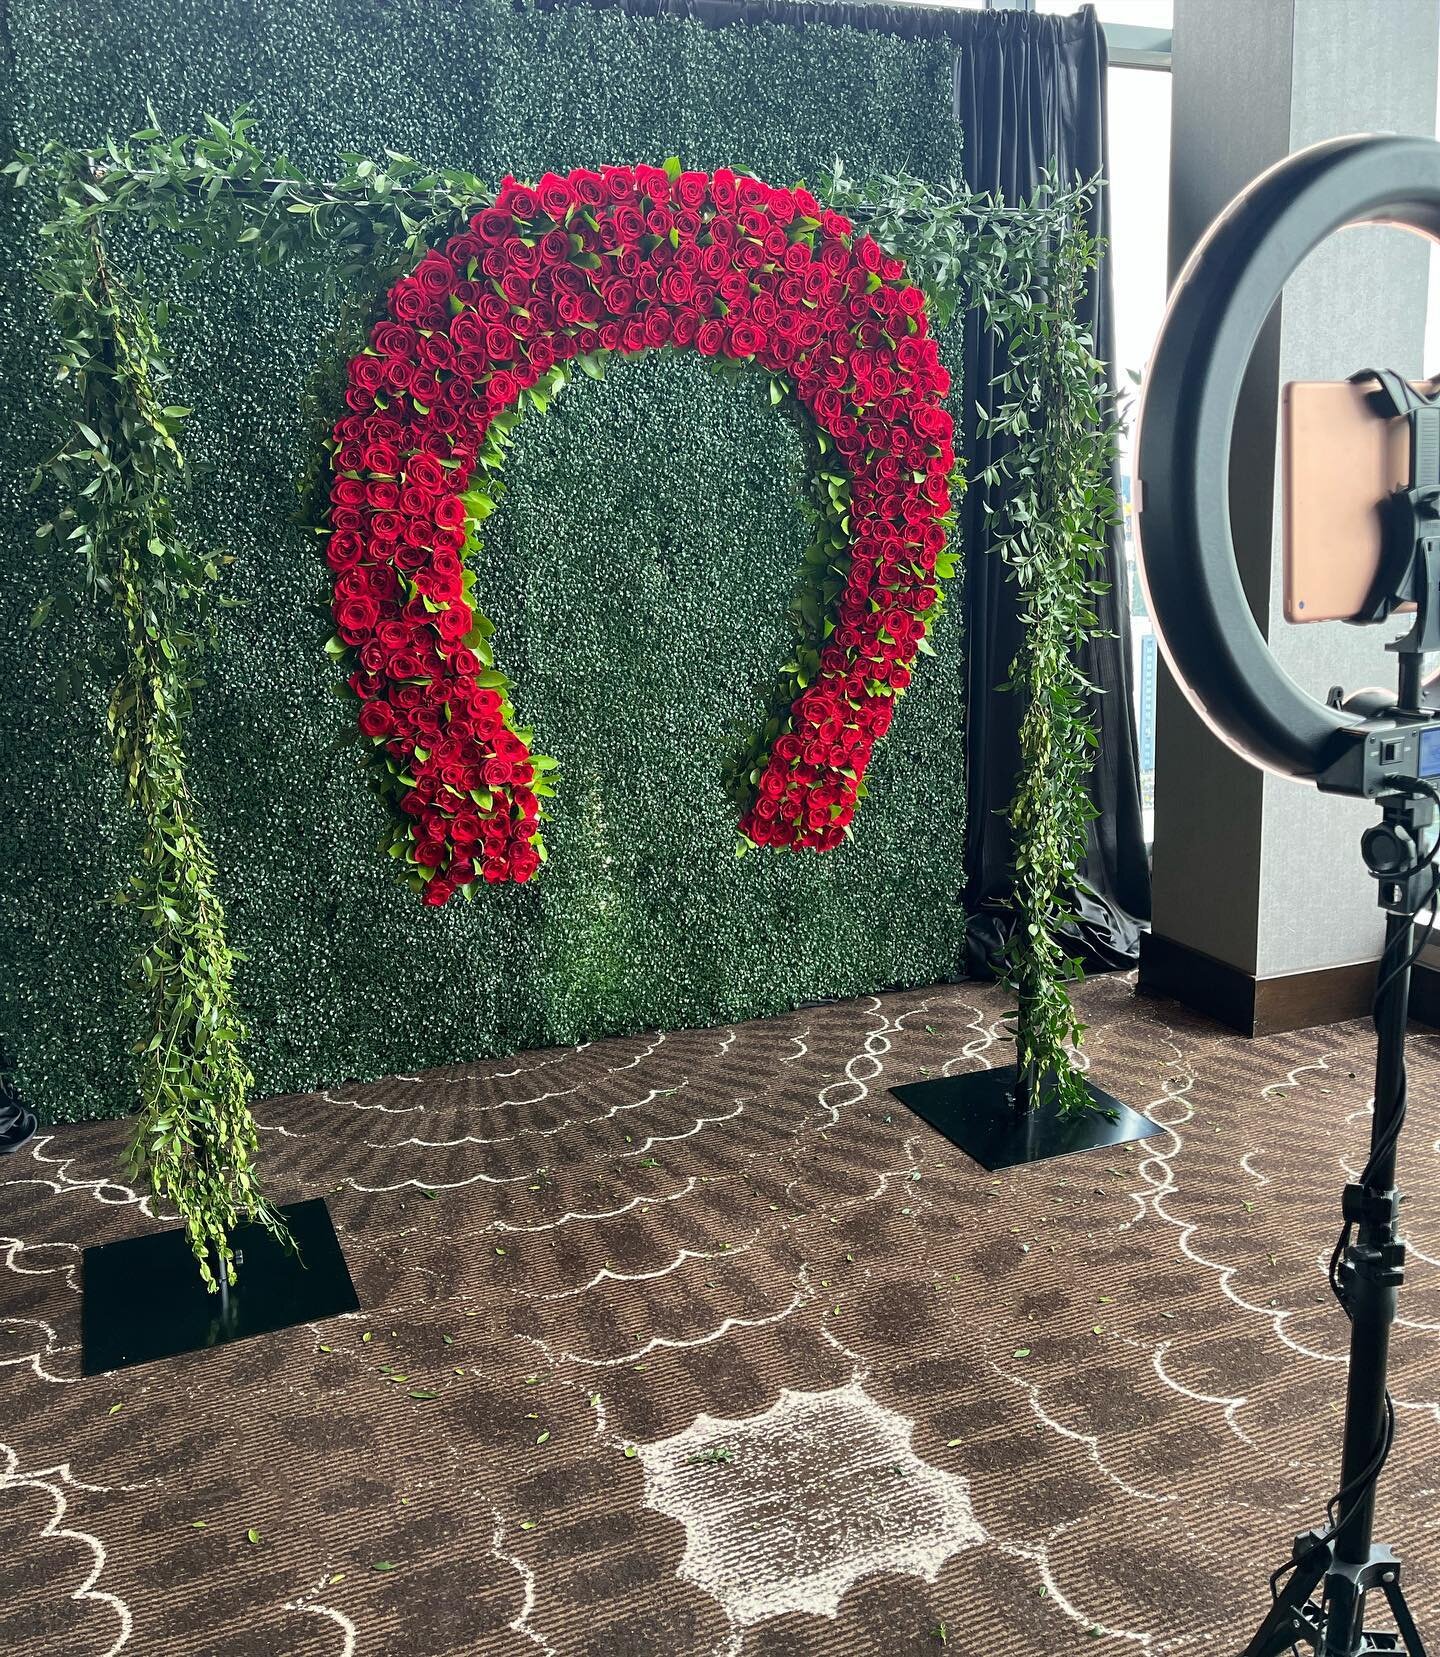 Had a blast creating this photo moment for the Kentucky Derby themed party at @ascendprimebellevue 🐎 🌹